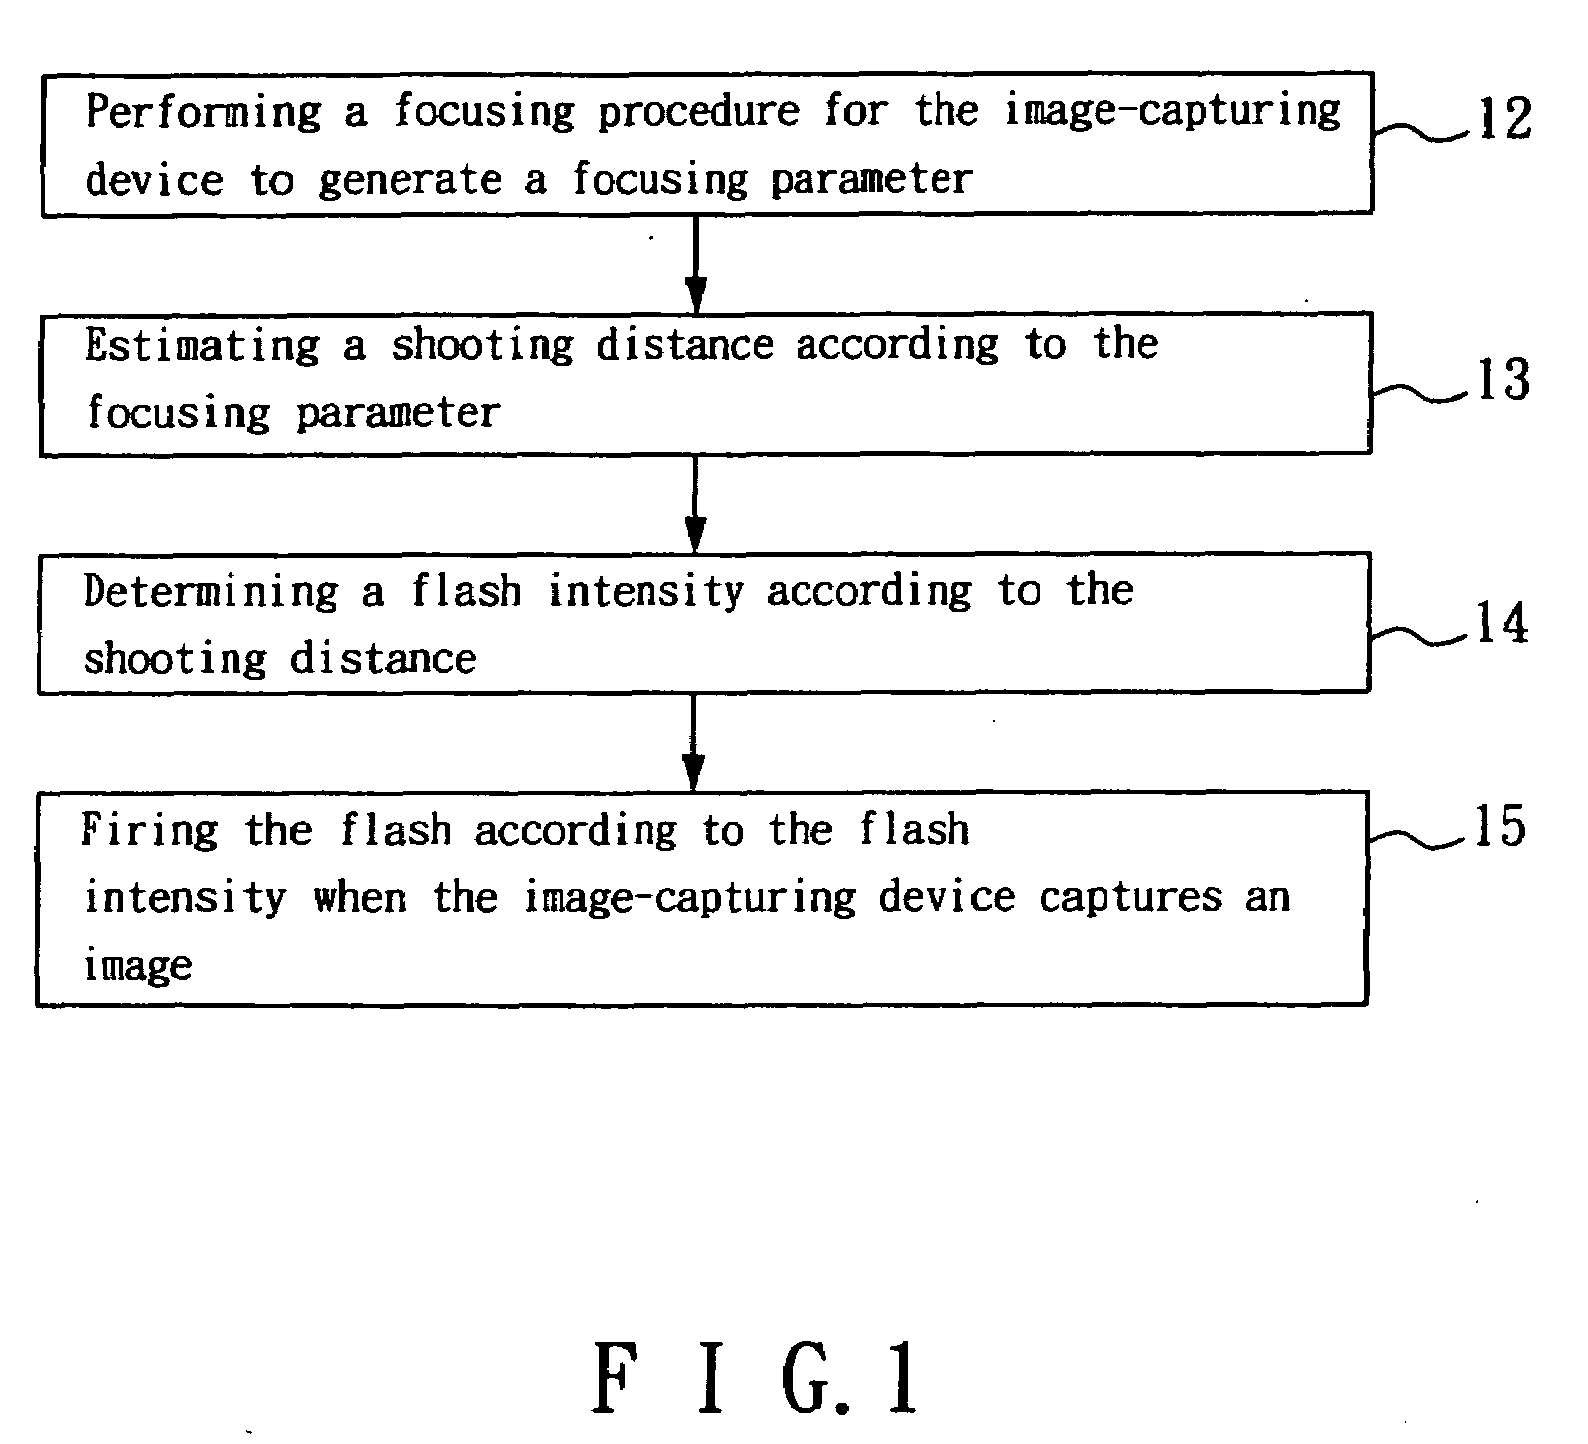 Method for firing flash of image-capturing device